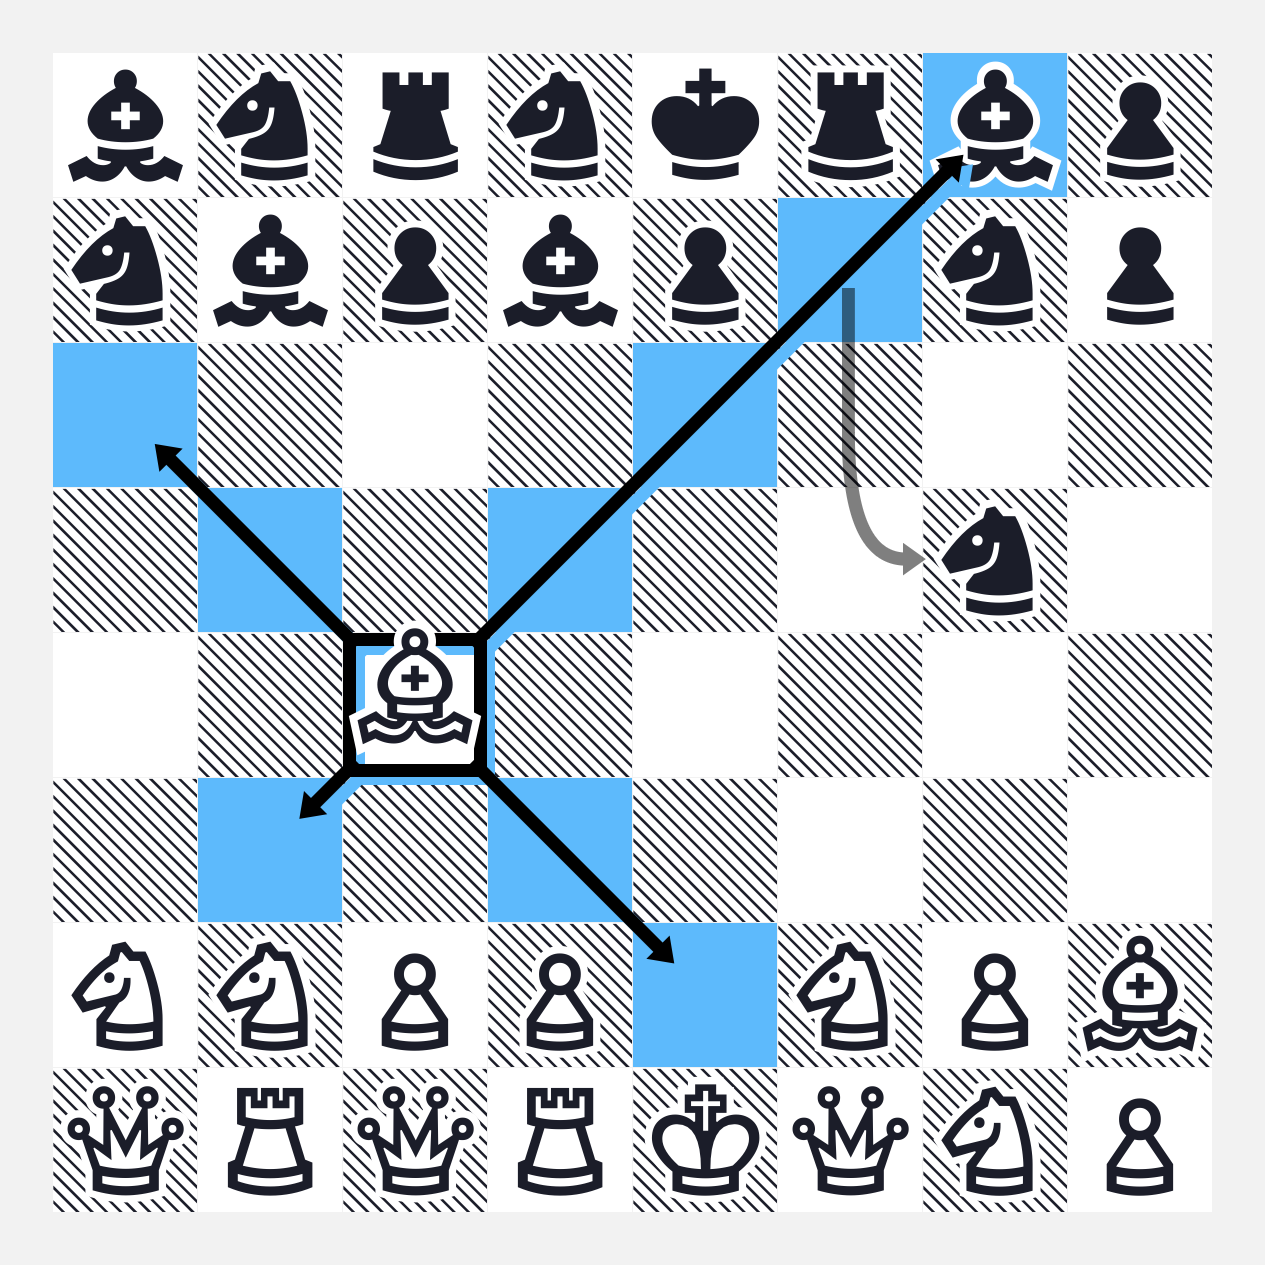 A chess board with randomised pieces